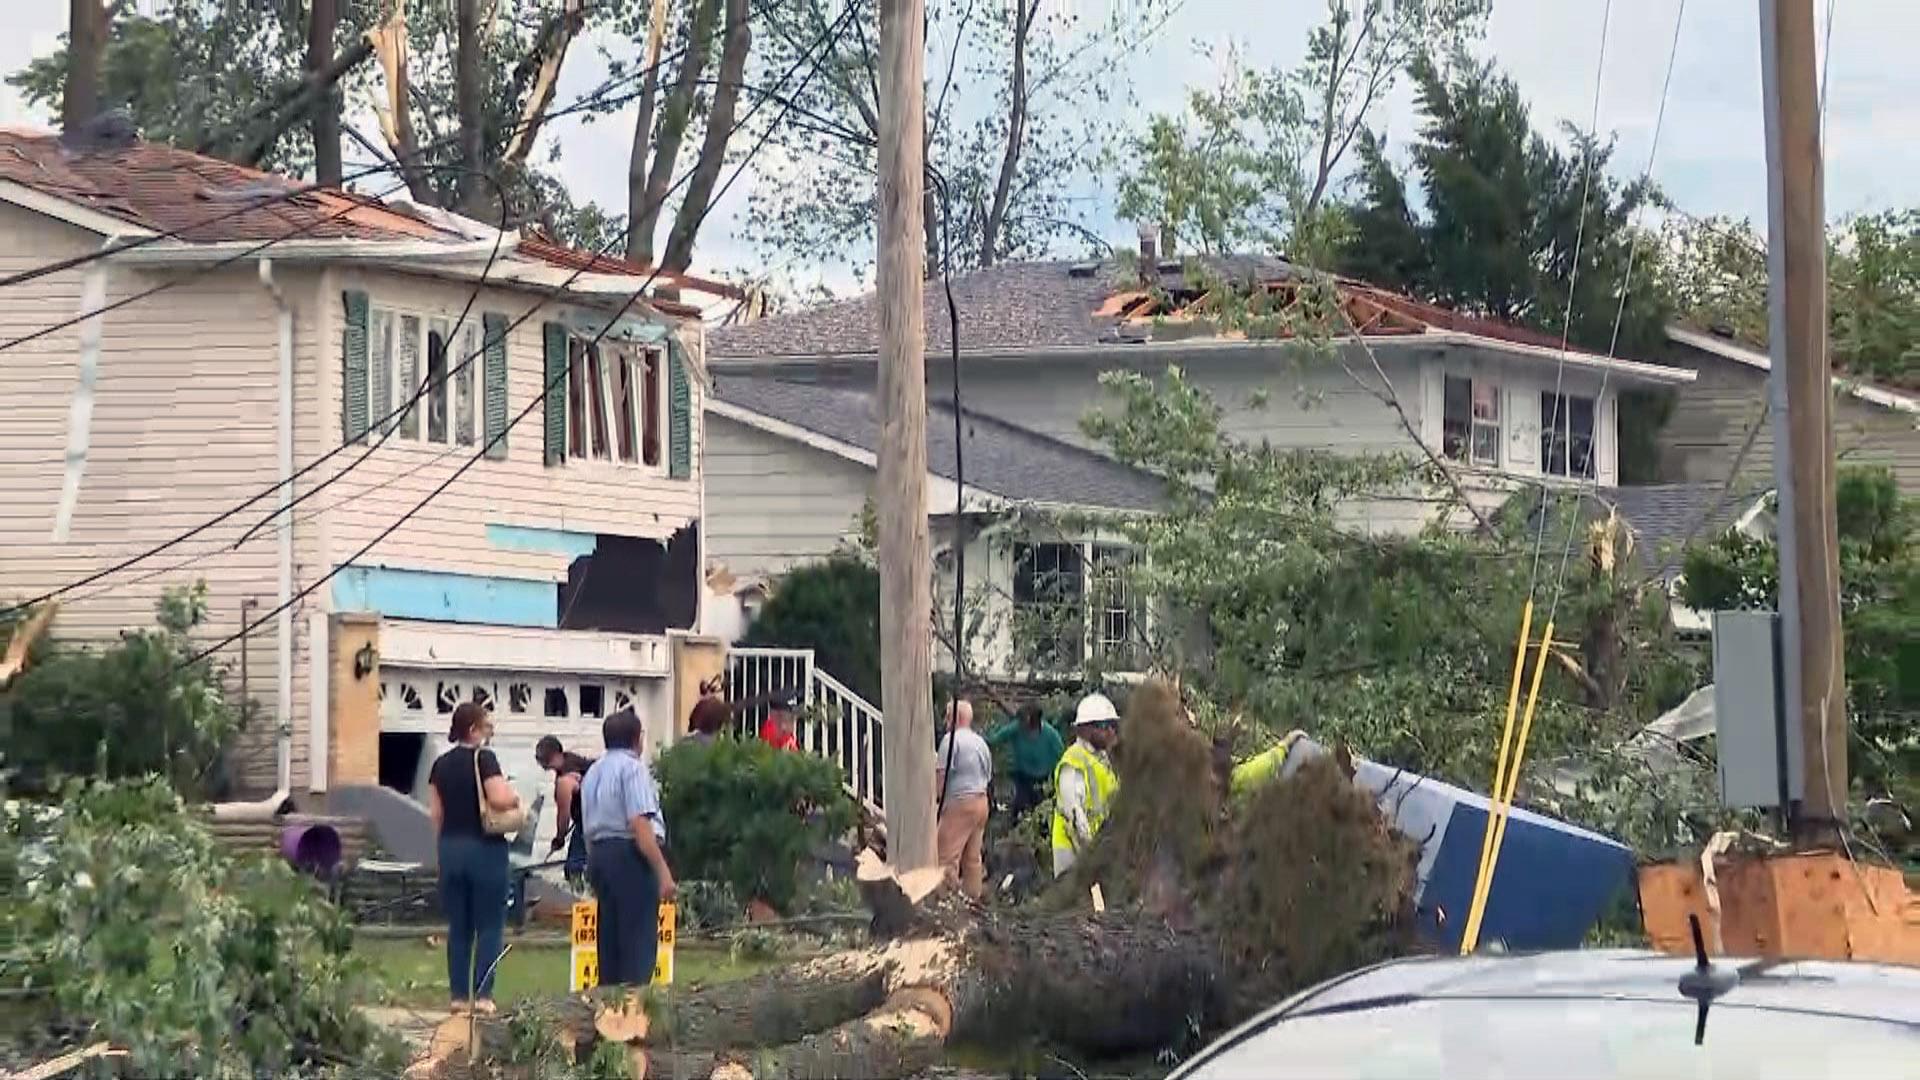 Cleanup efforts are underway Monday, June 21, 2021 in suburban Woodridge following a tornado and severe storms Sunday night. (WTTW News)